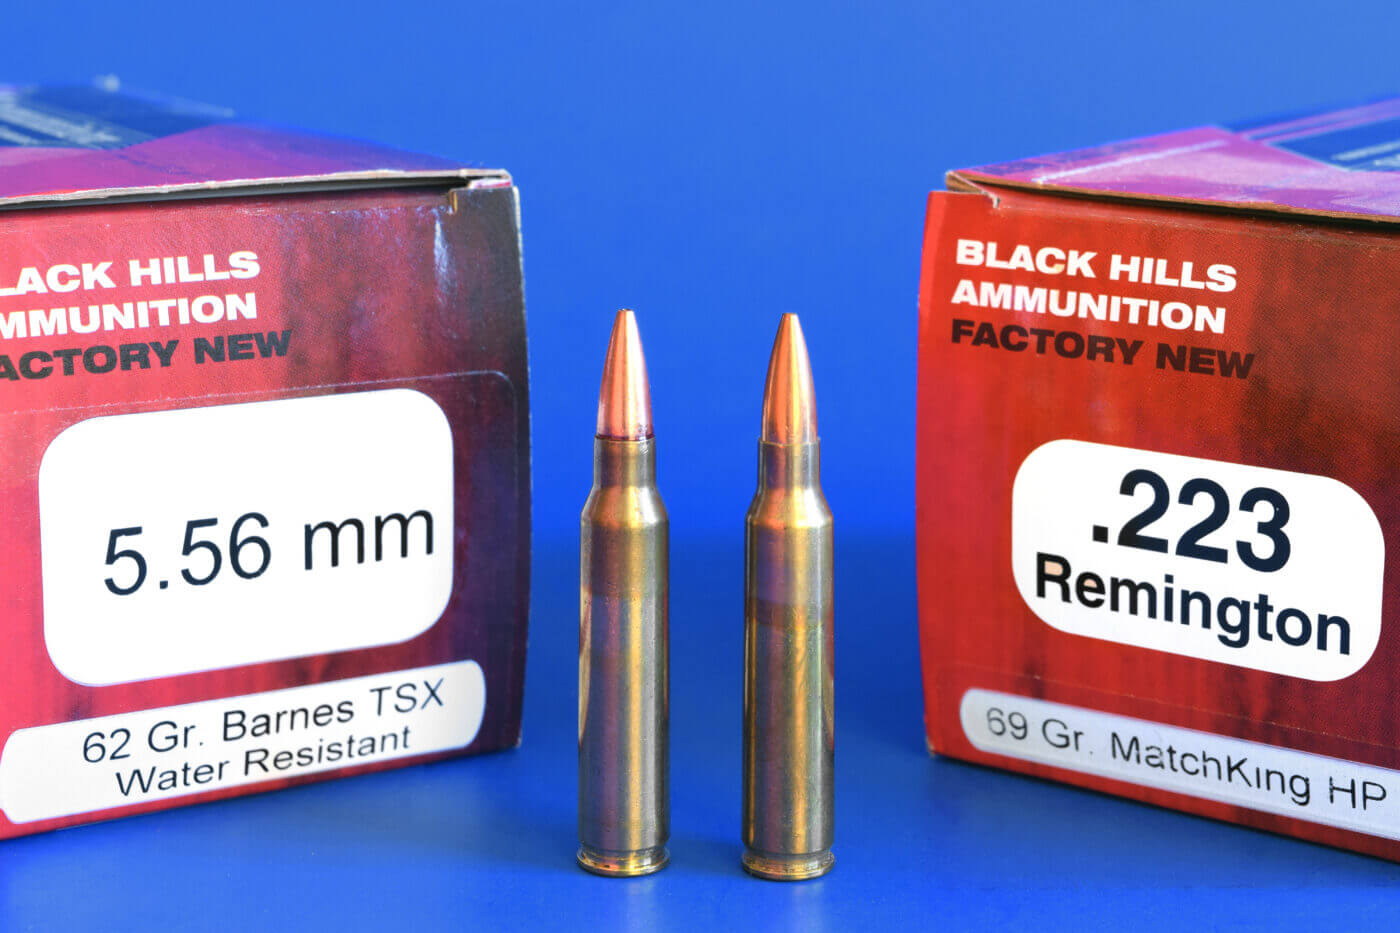 Comparing the 5.56 and .223 ammunition from Black Hills